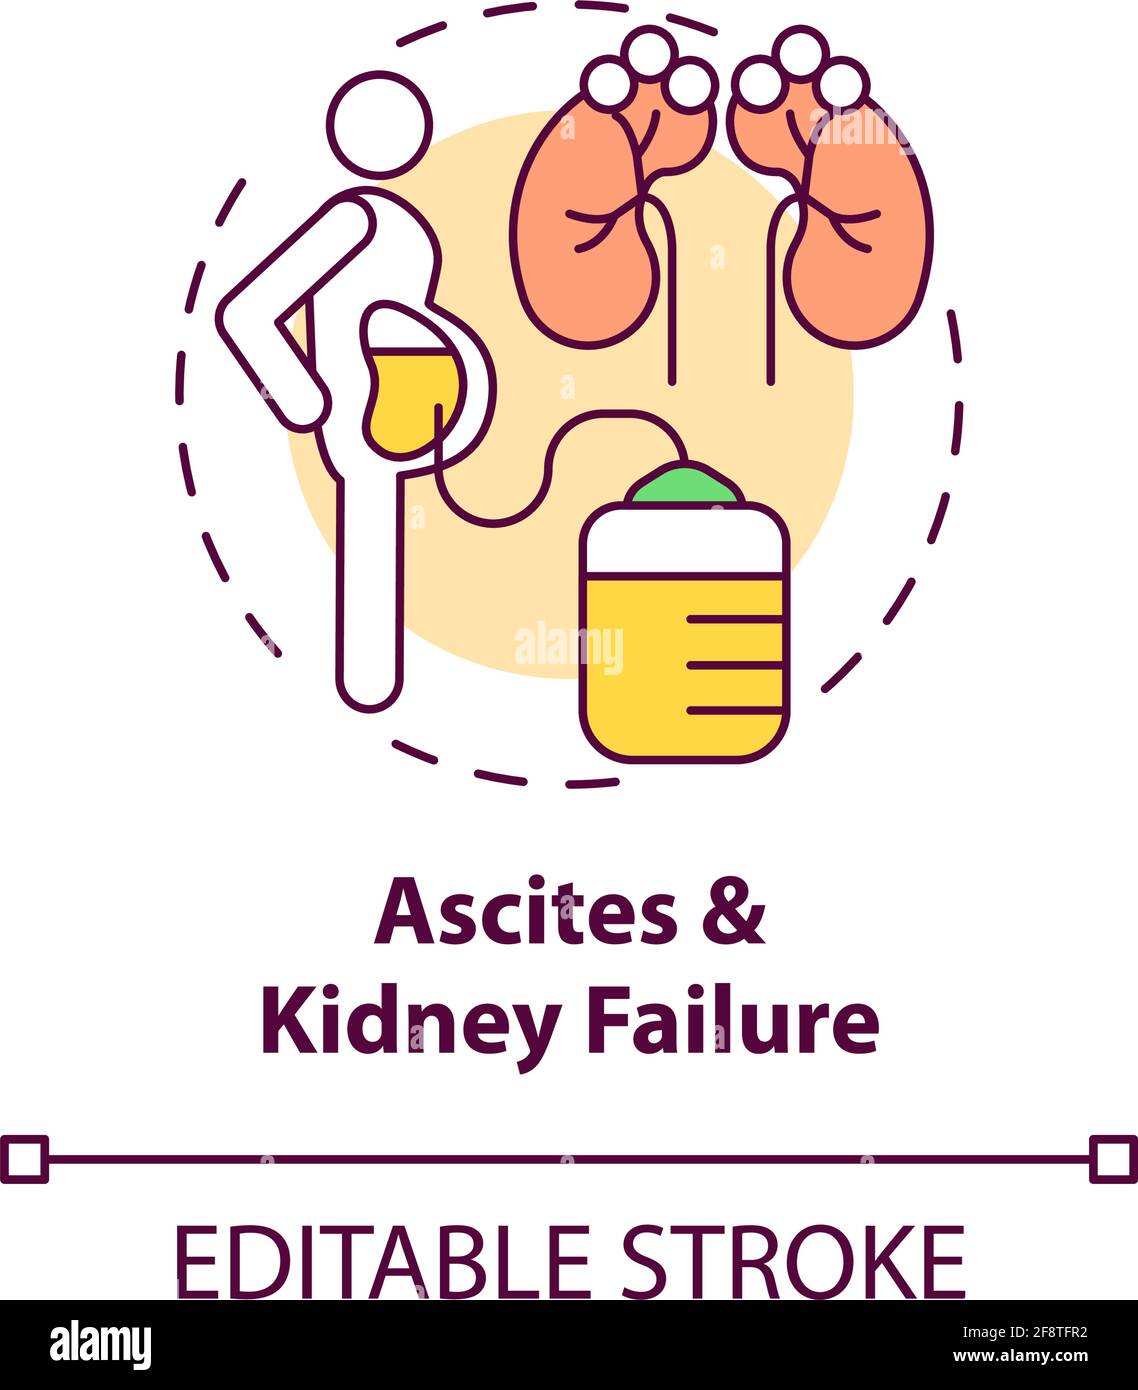 Ascites and kidney failure concept icon Stock Vector